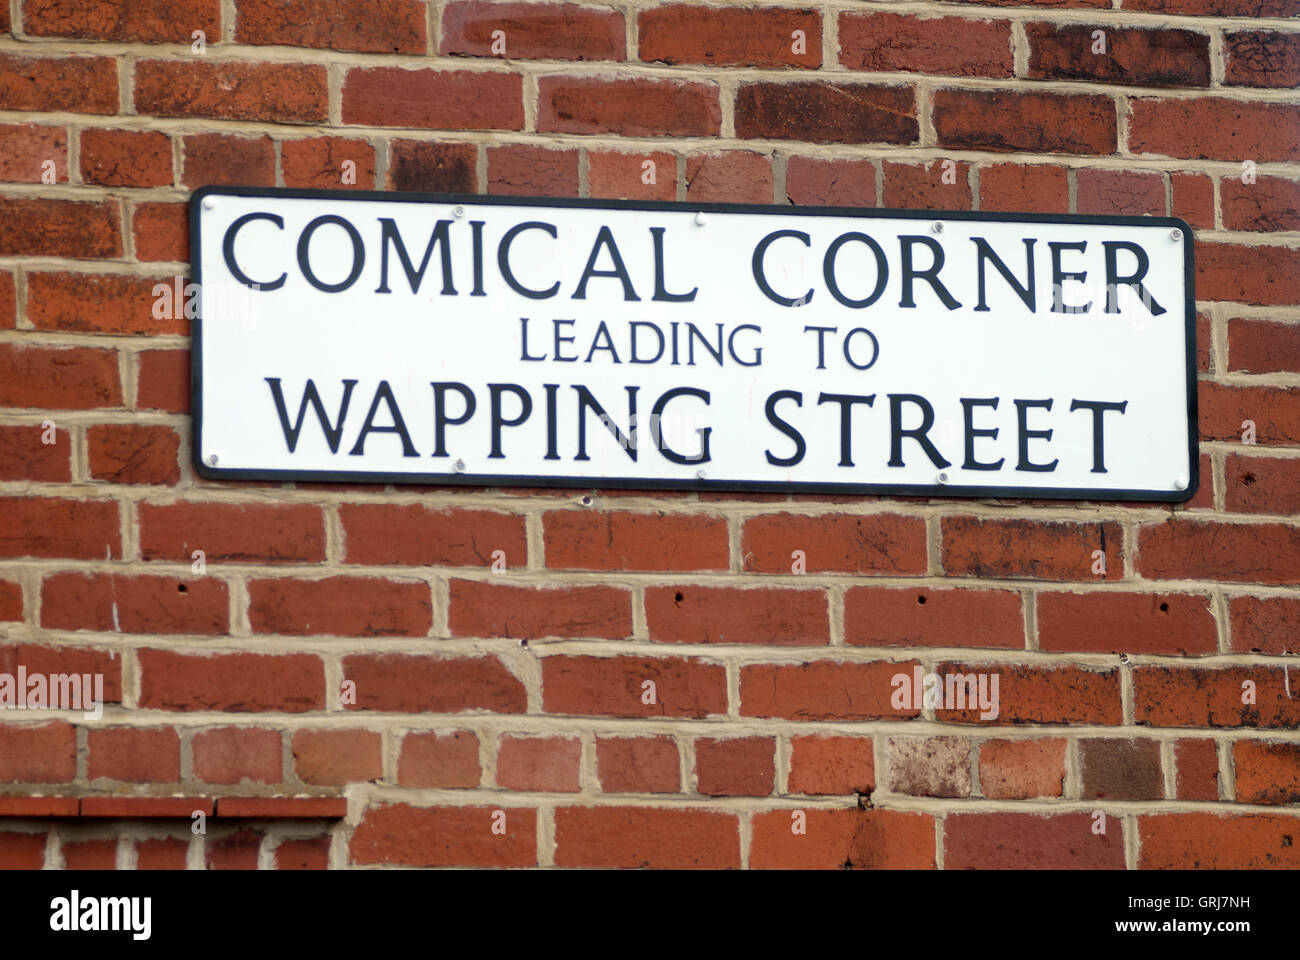 Comical Corner Leading to Wapping Street, South Shields Stock Photo